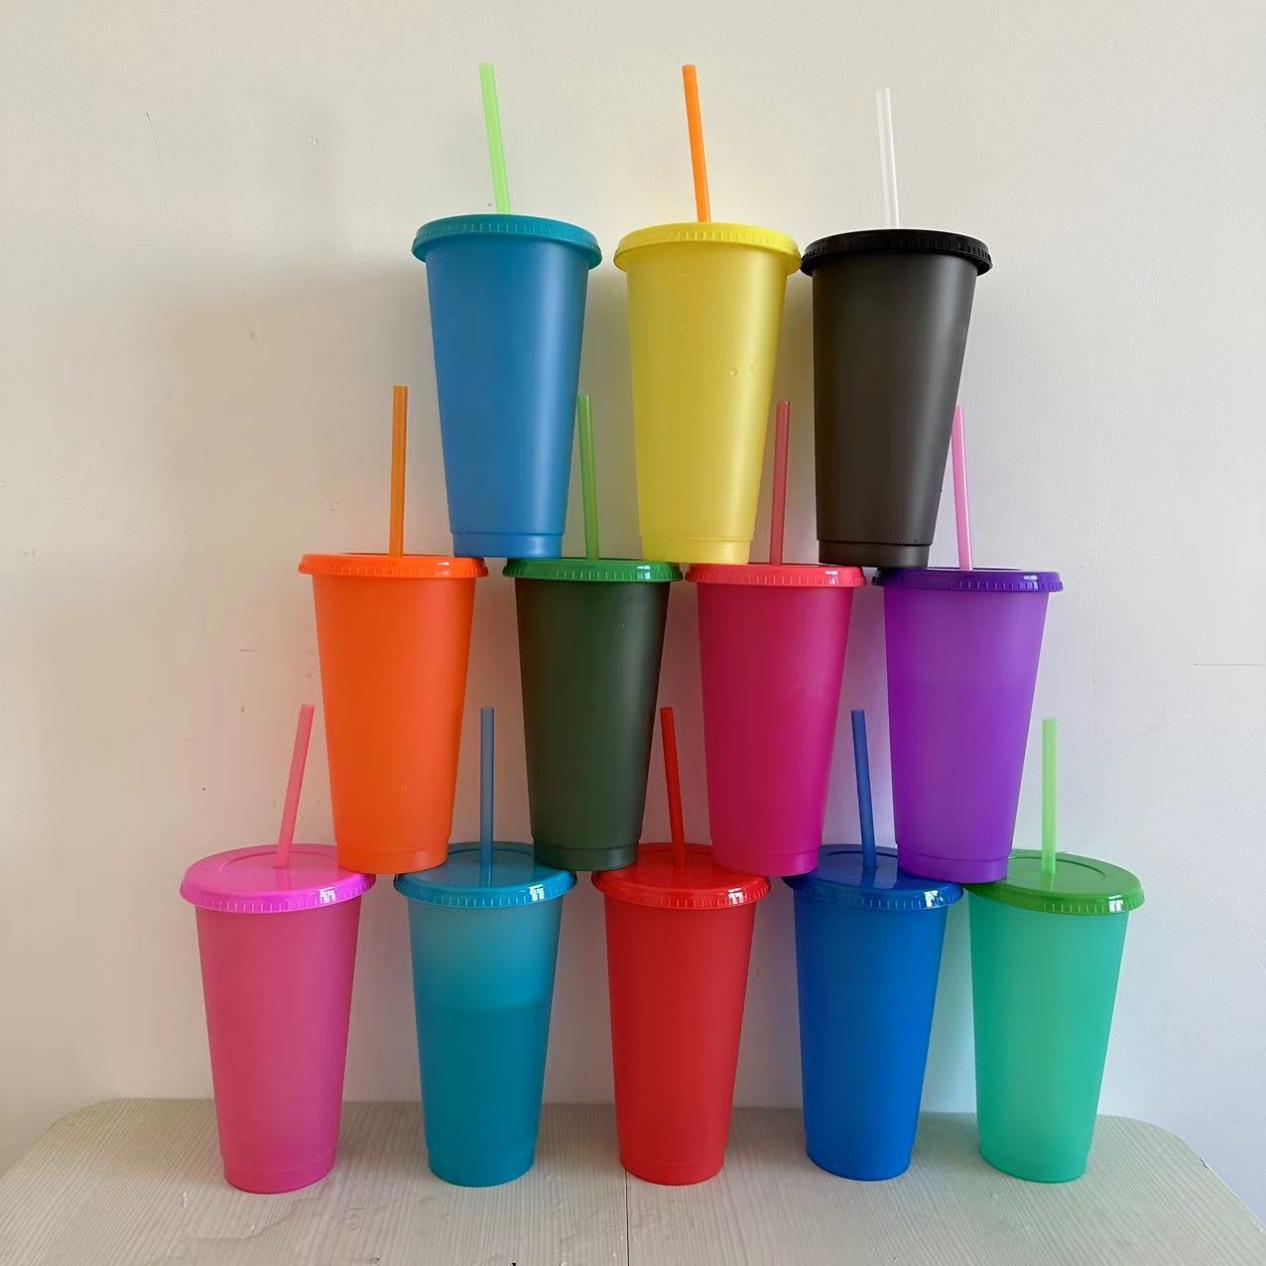 Our Latest Shipment of 12-Pack 24oz Cups